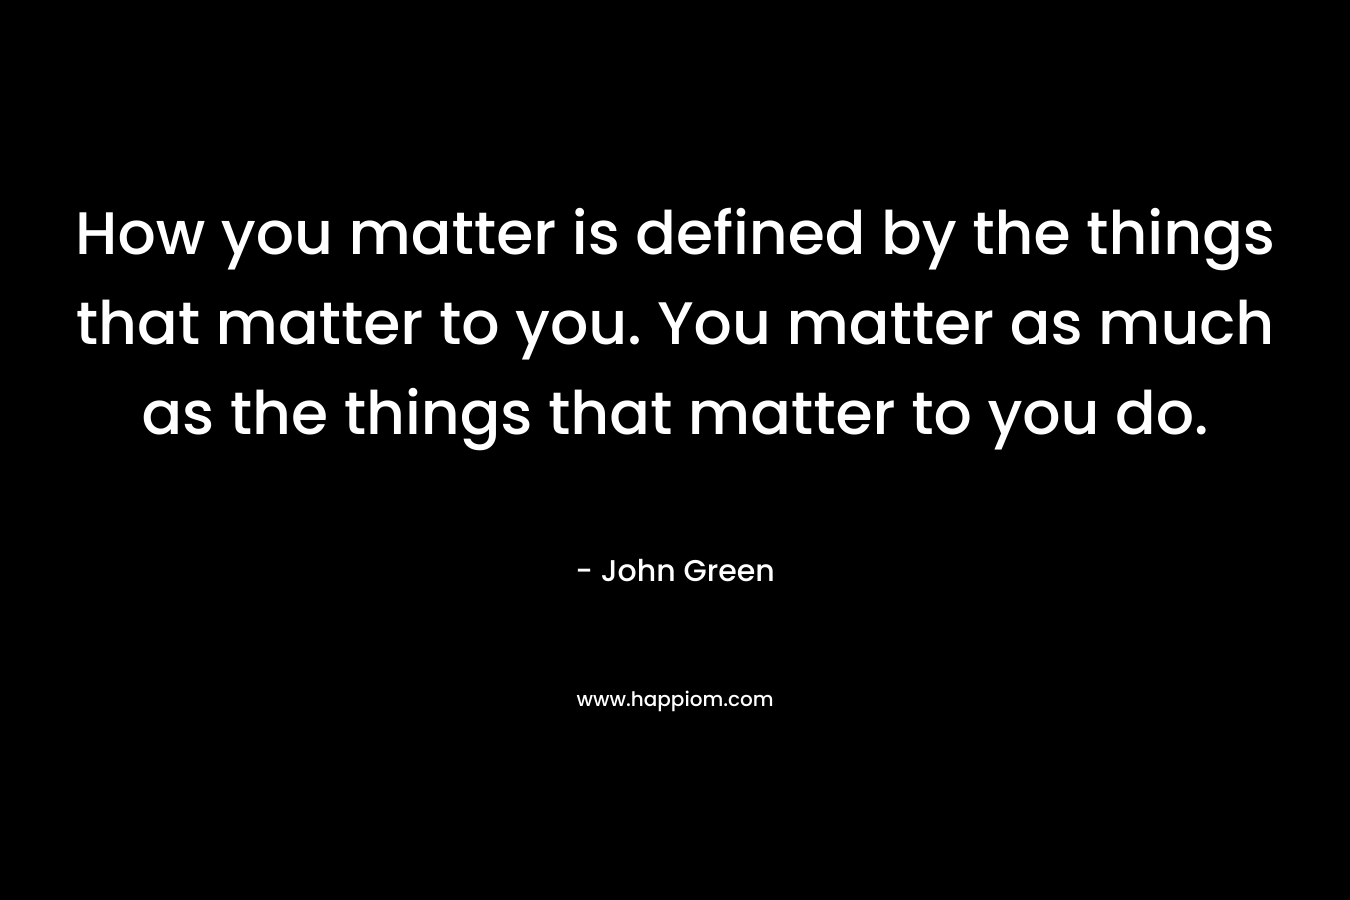 How you matter is defined by the things that matter to you. You matter as much as the things that matter to you do.